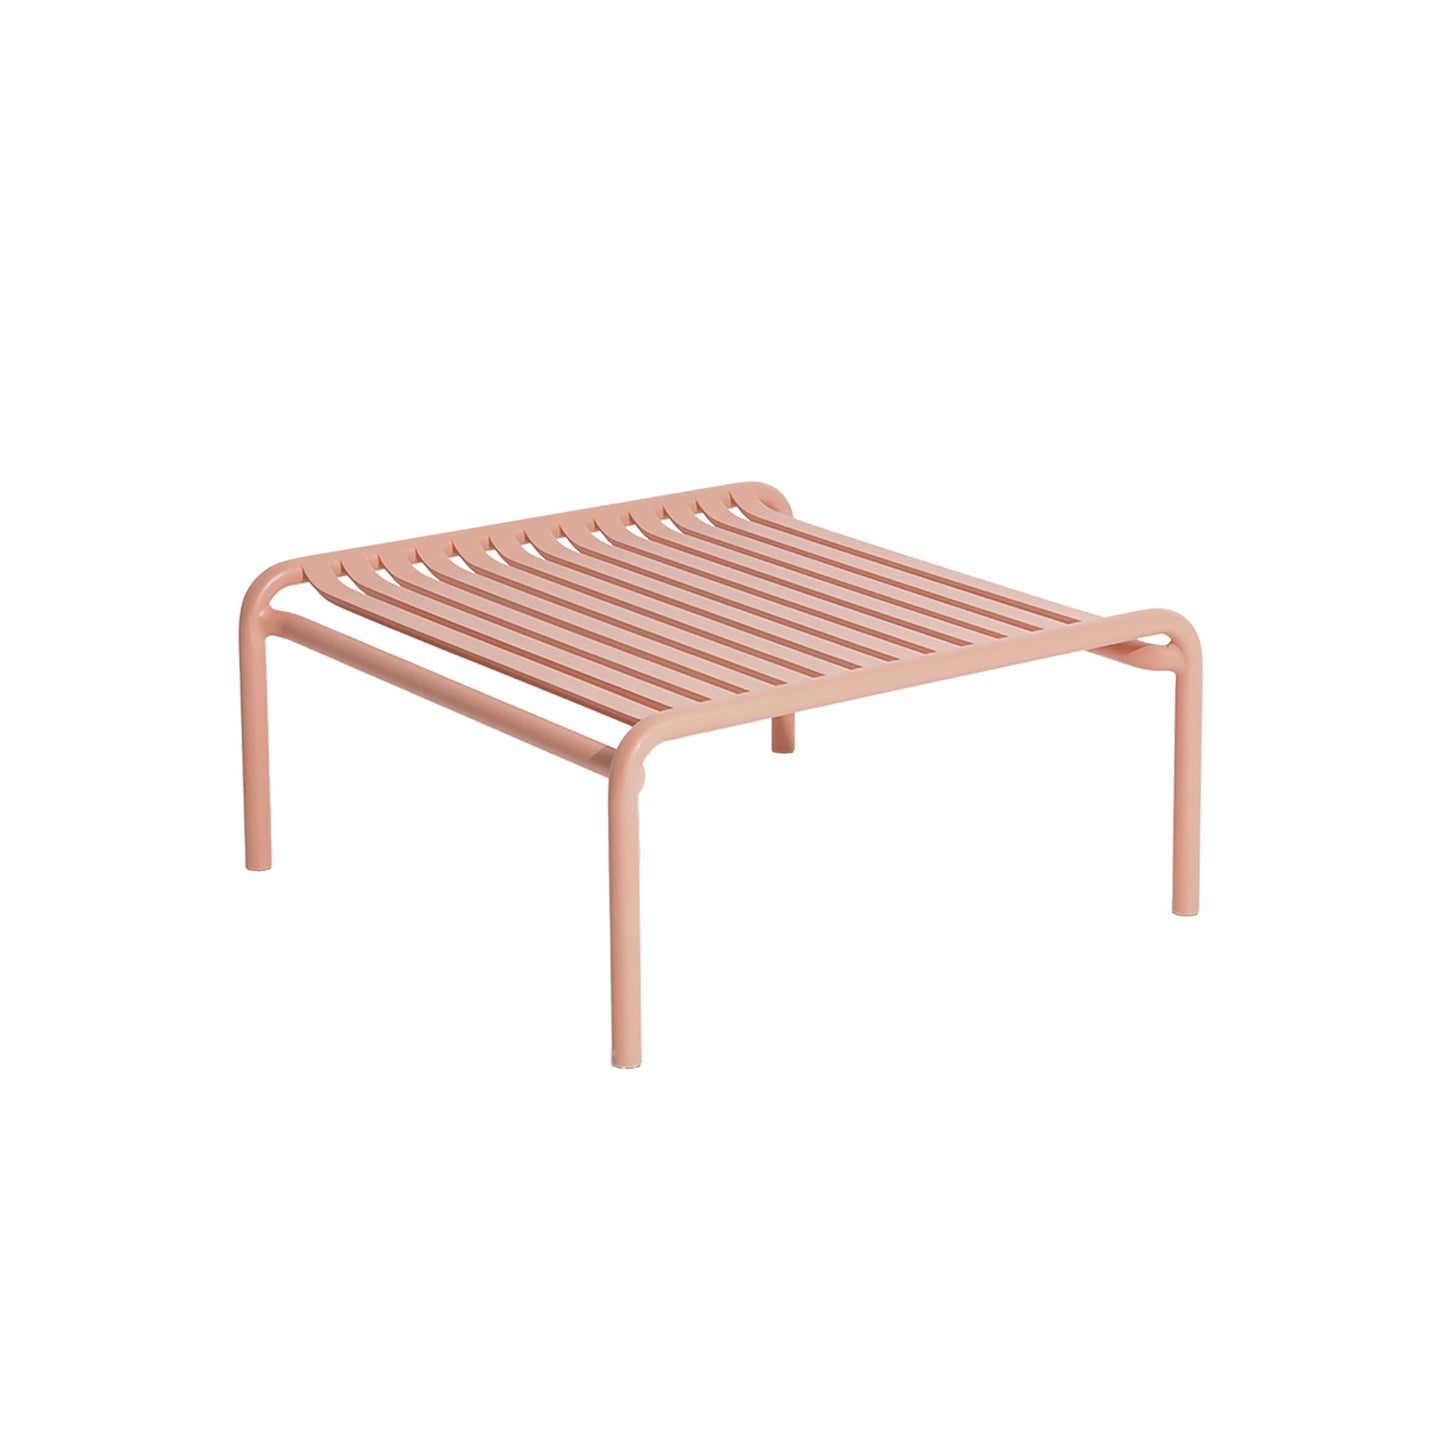 WEEK-END Coffee Table by Petite Friture #Blush